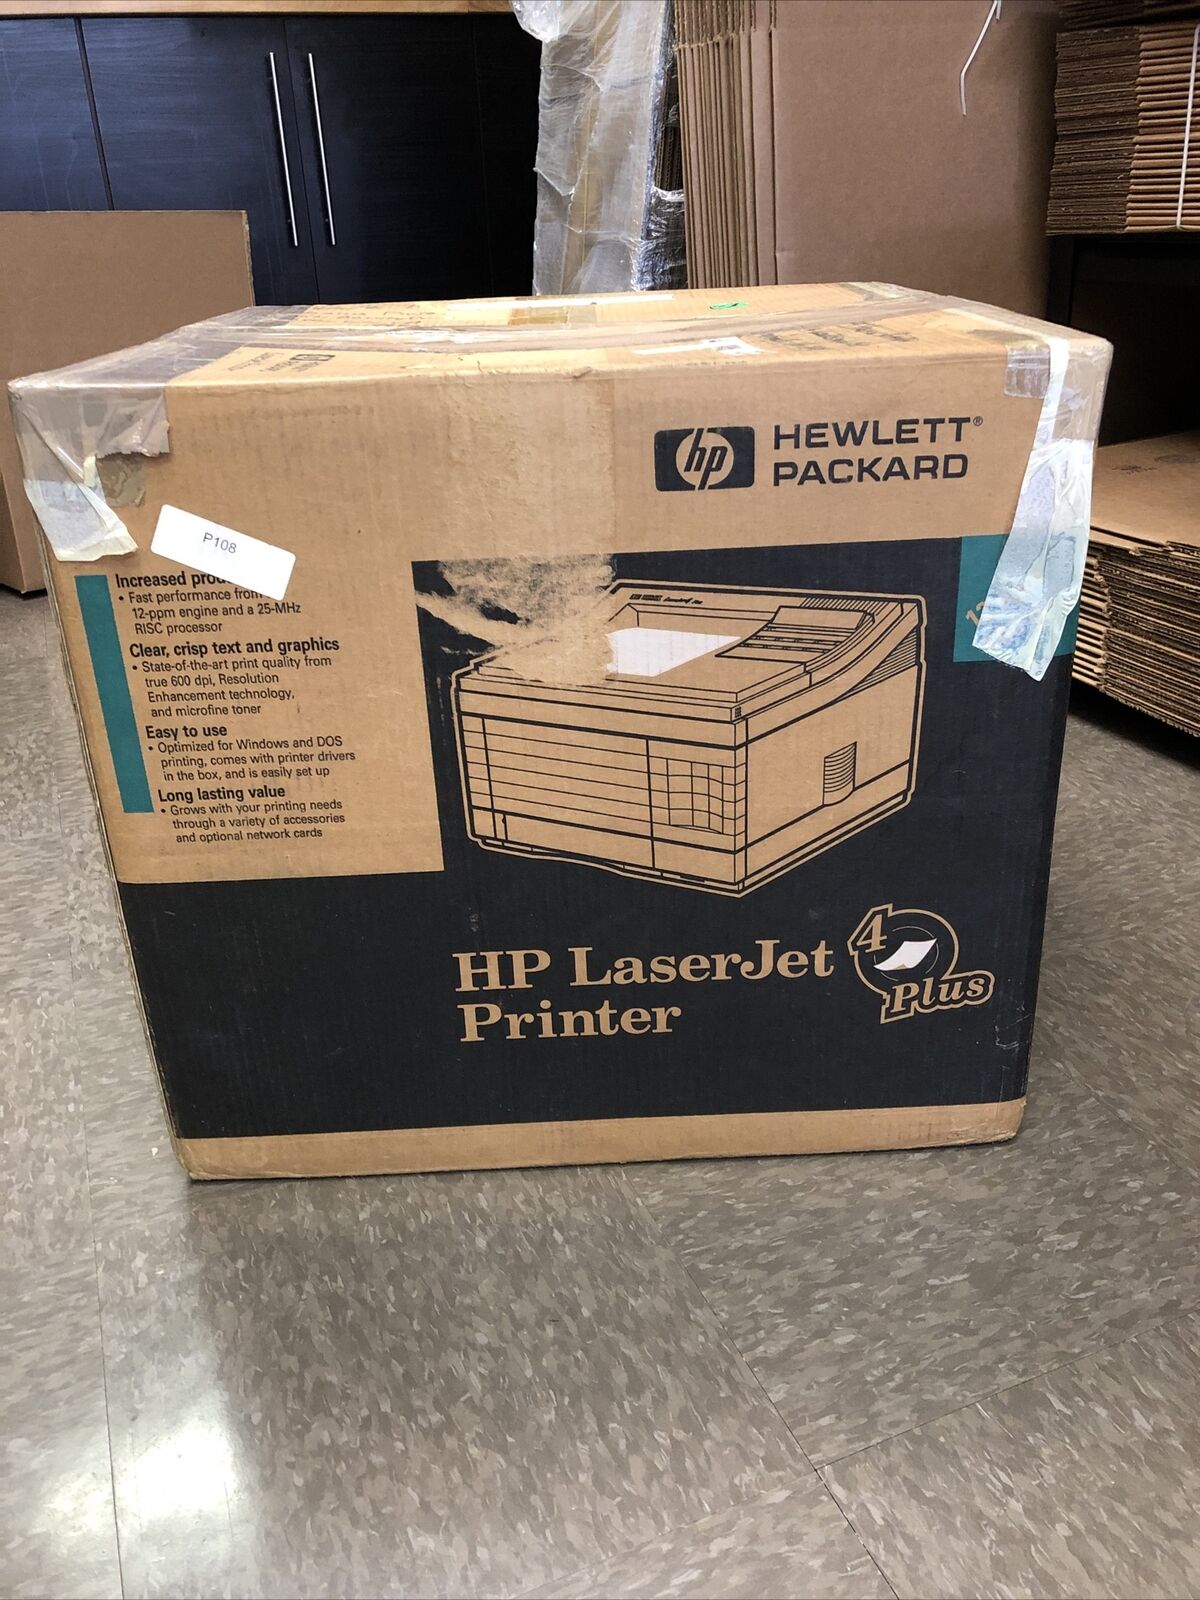 HP LaserJet 4 Plus Printer C2037A C3157A with Duplexer & Jetdirect (Powers On)